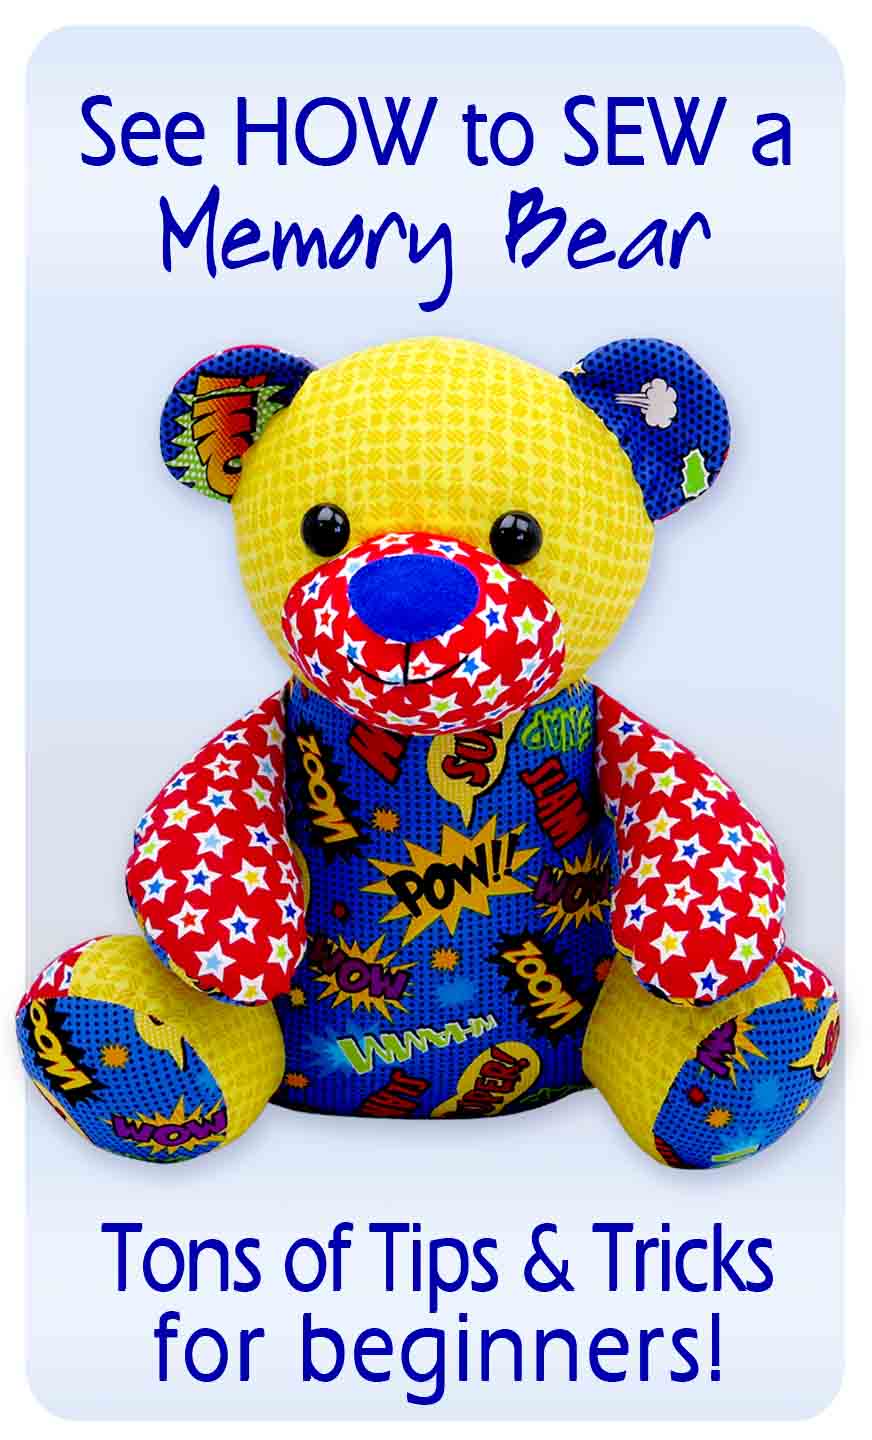 See how to sew a Memory Bear - Tons of Tips & Tricks for beginners.jpg